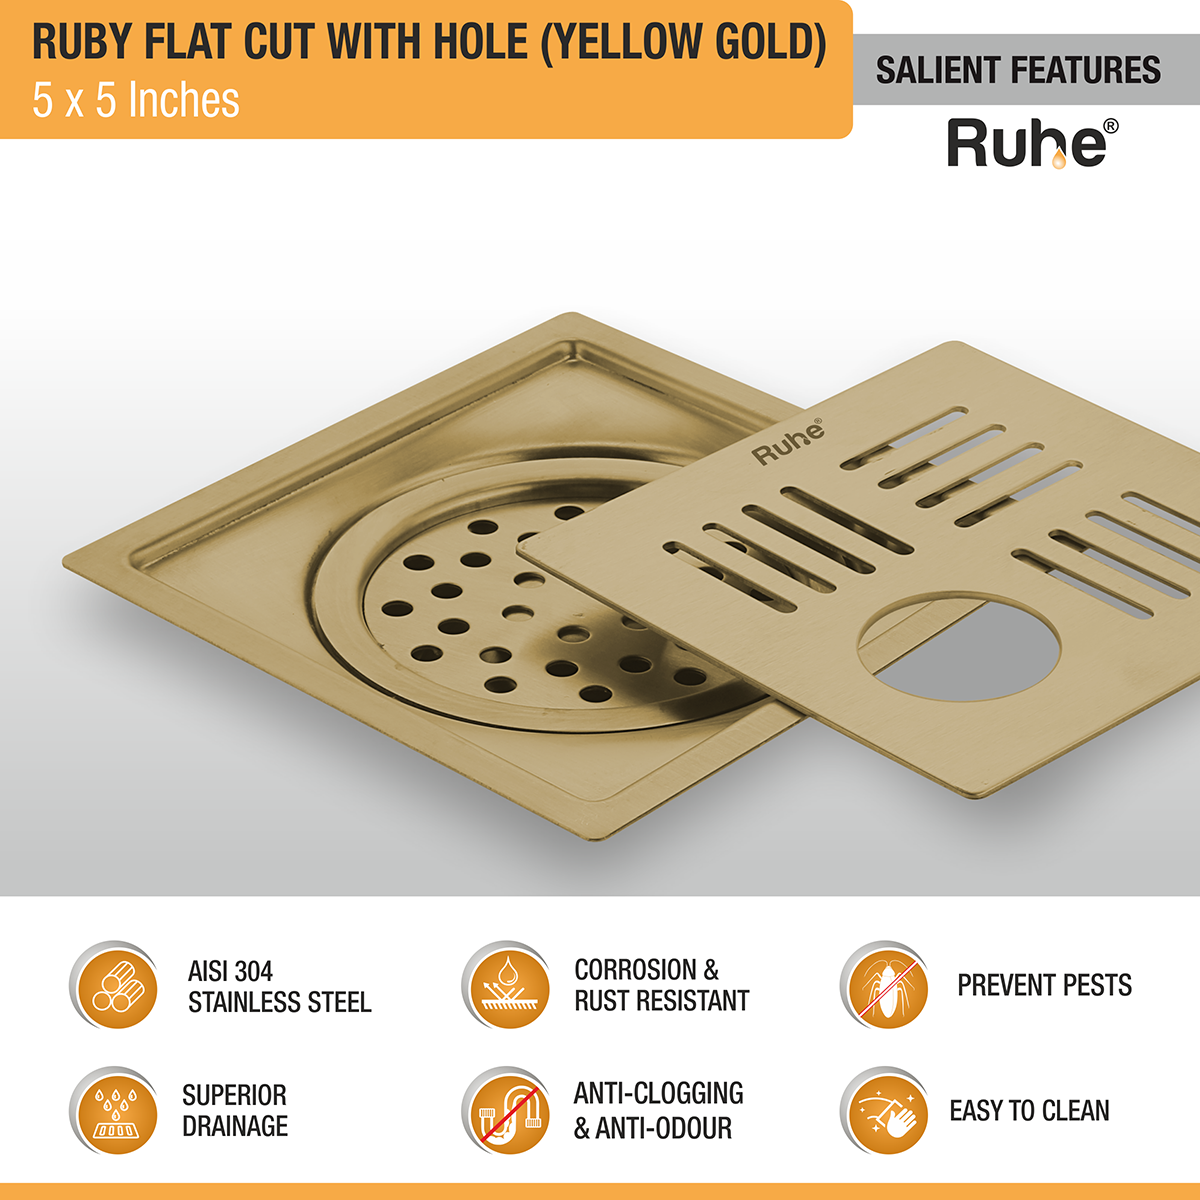 Ruby Square Flat Cut Floor Drain in Yellow Gold PVD Coating (5 x 5 Inches) with Hole features